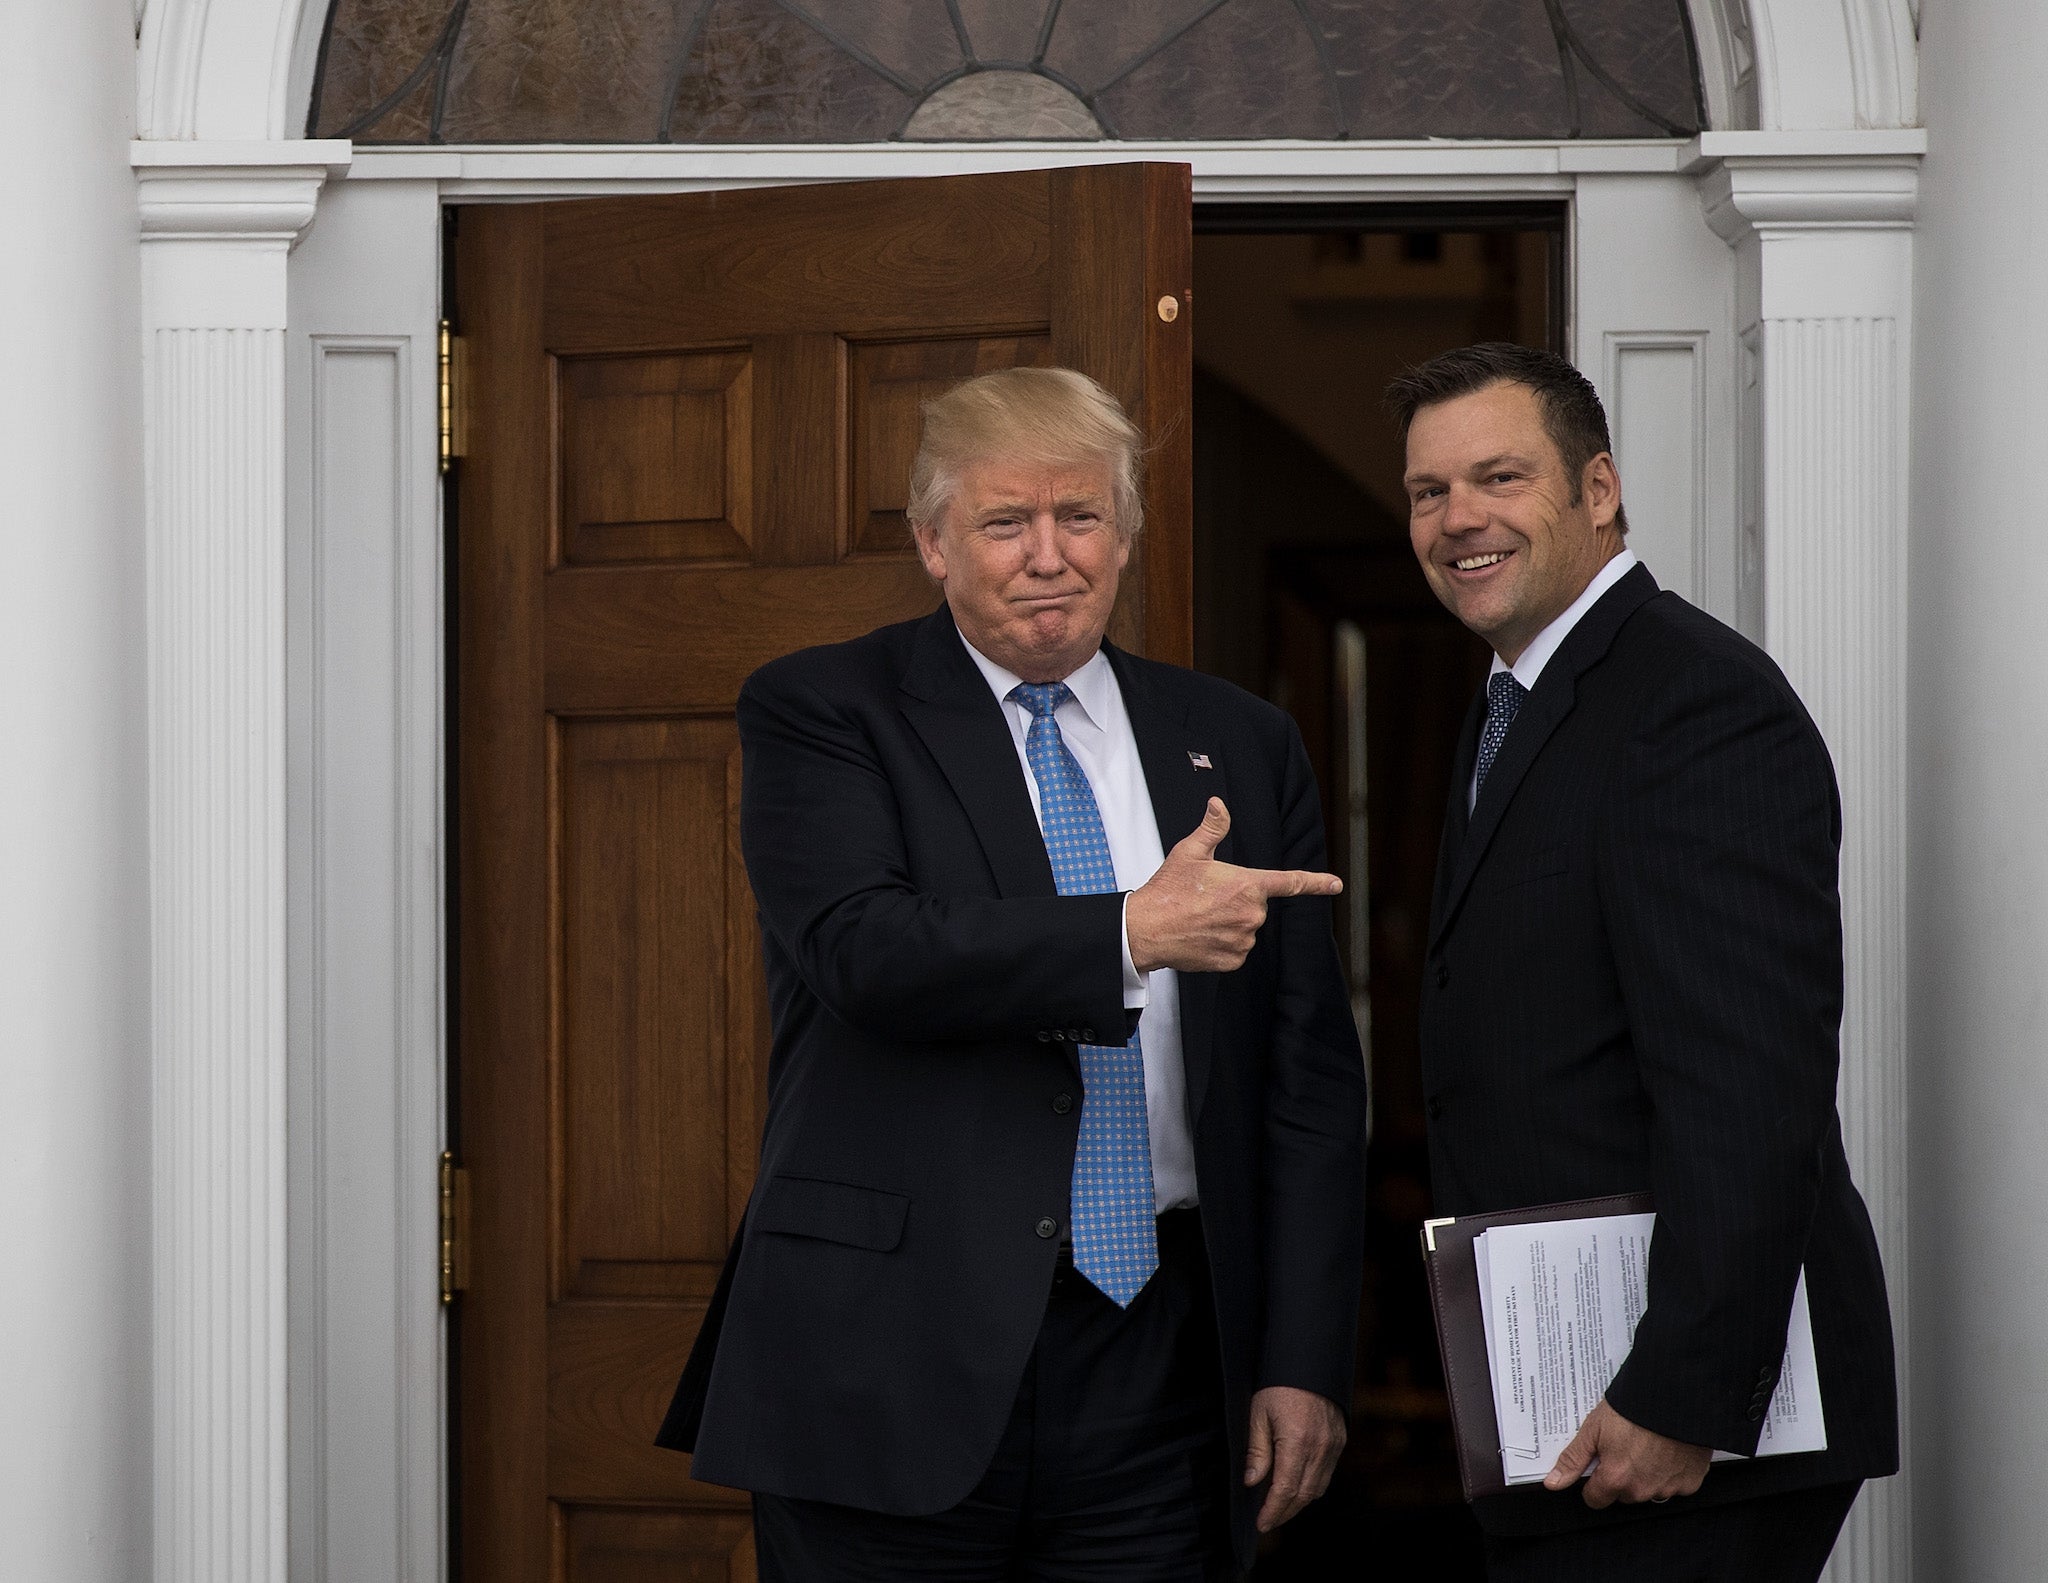 President-elect Donald Trump and Kris Kobach, Kansas secretary of state, pose for a photo following their meeting in New Jersey on 20 November 2016